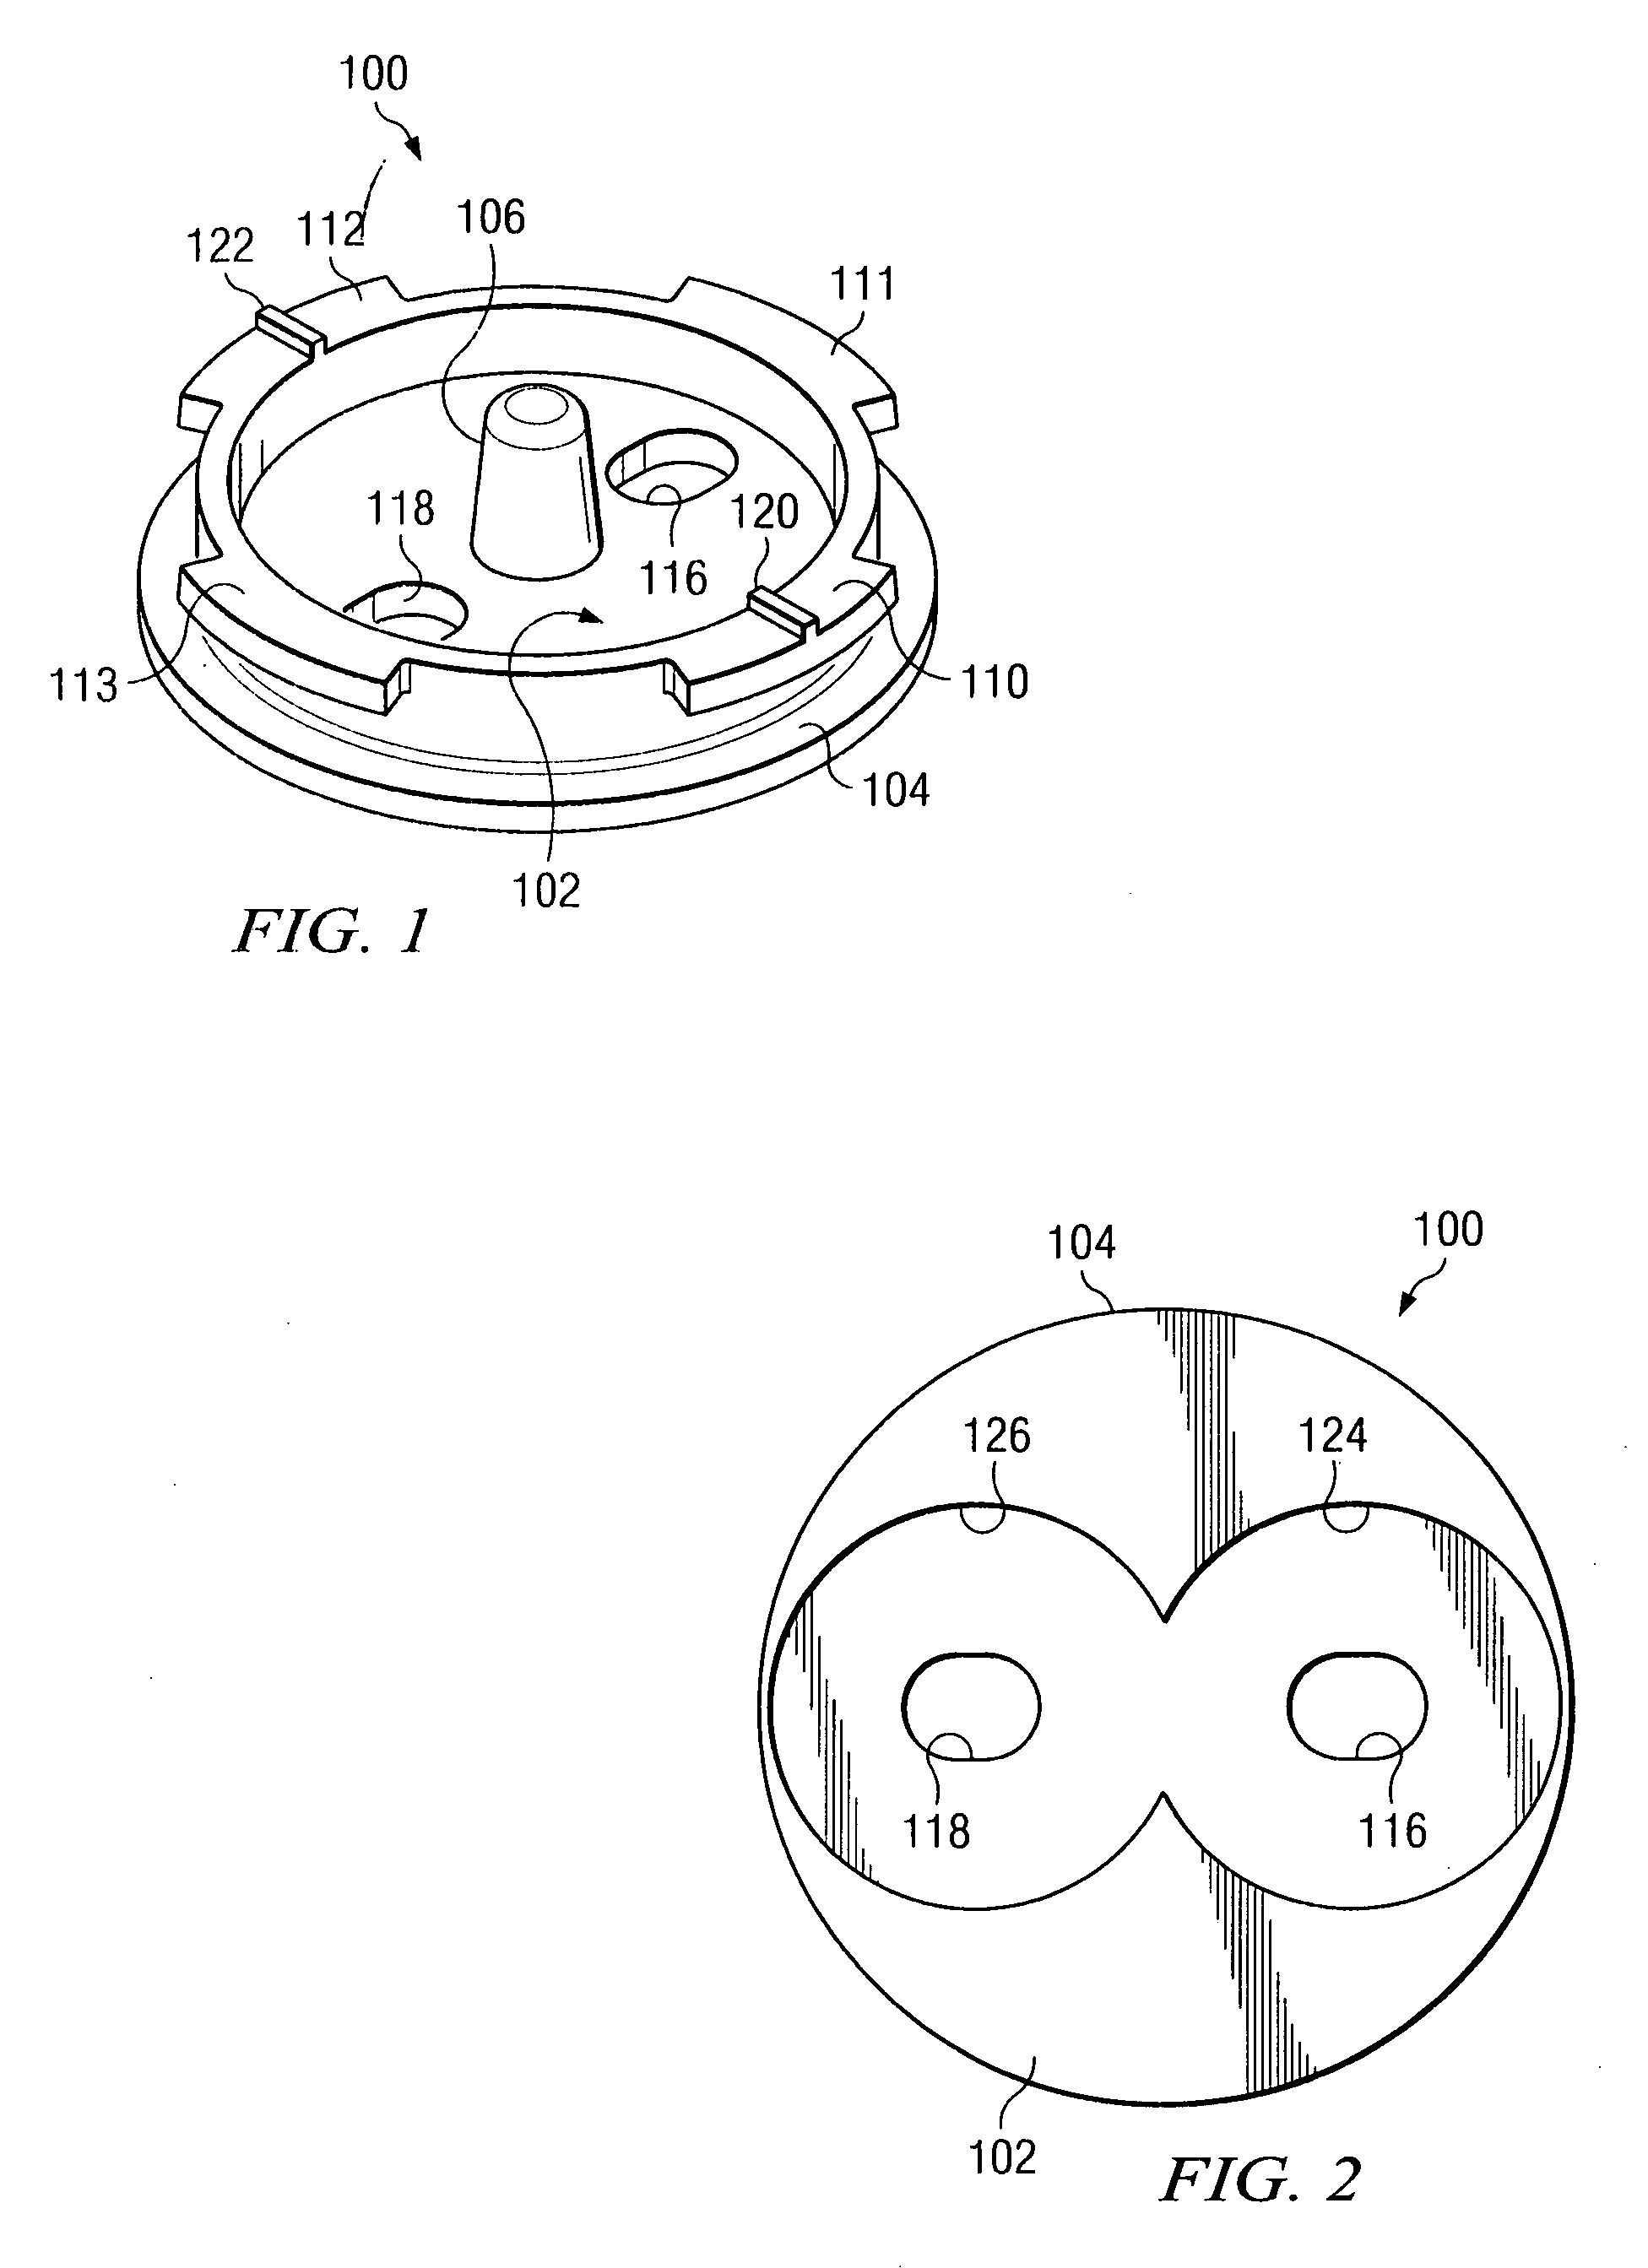 Bathroom fixture attachment device including a rotary coupling